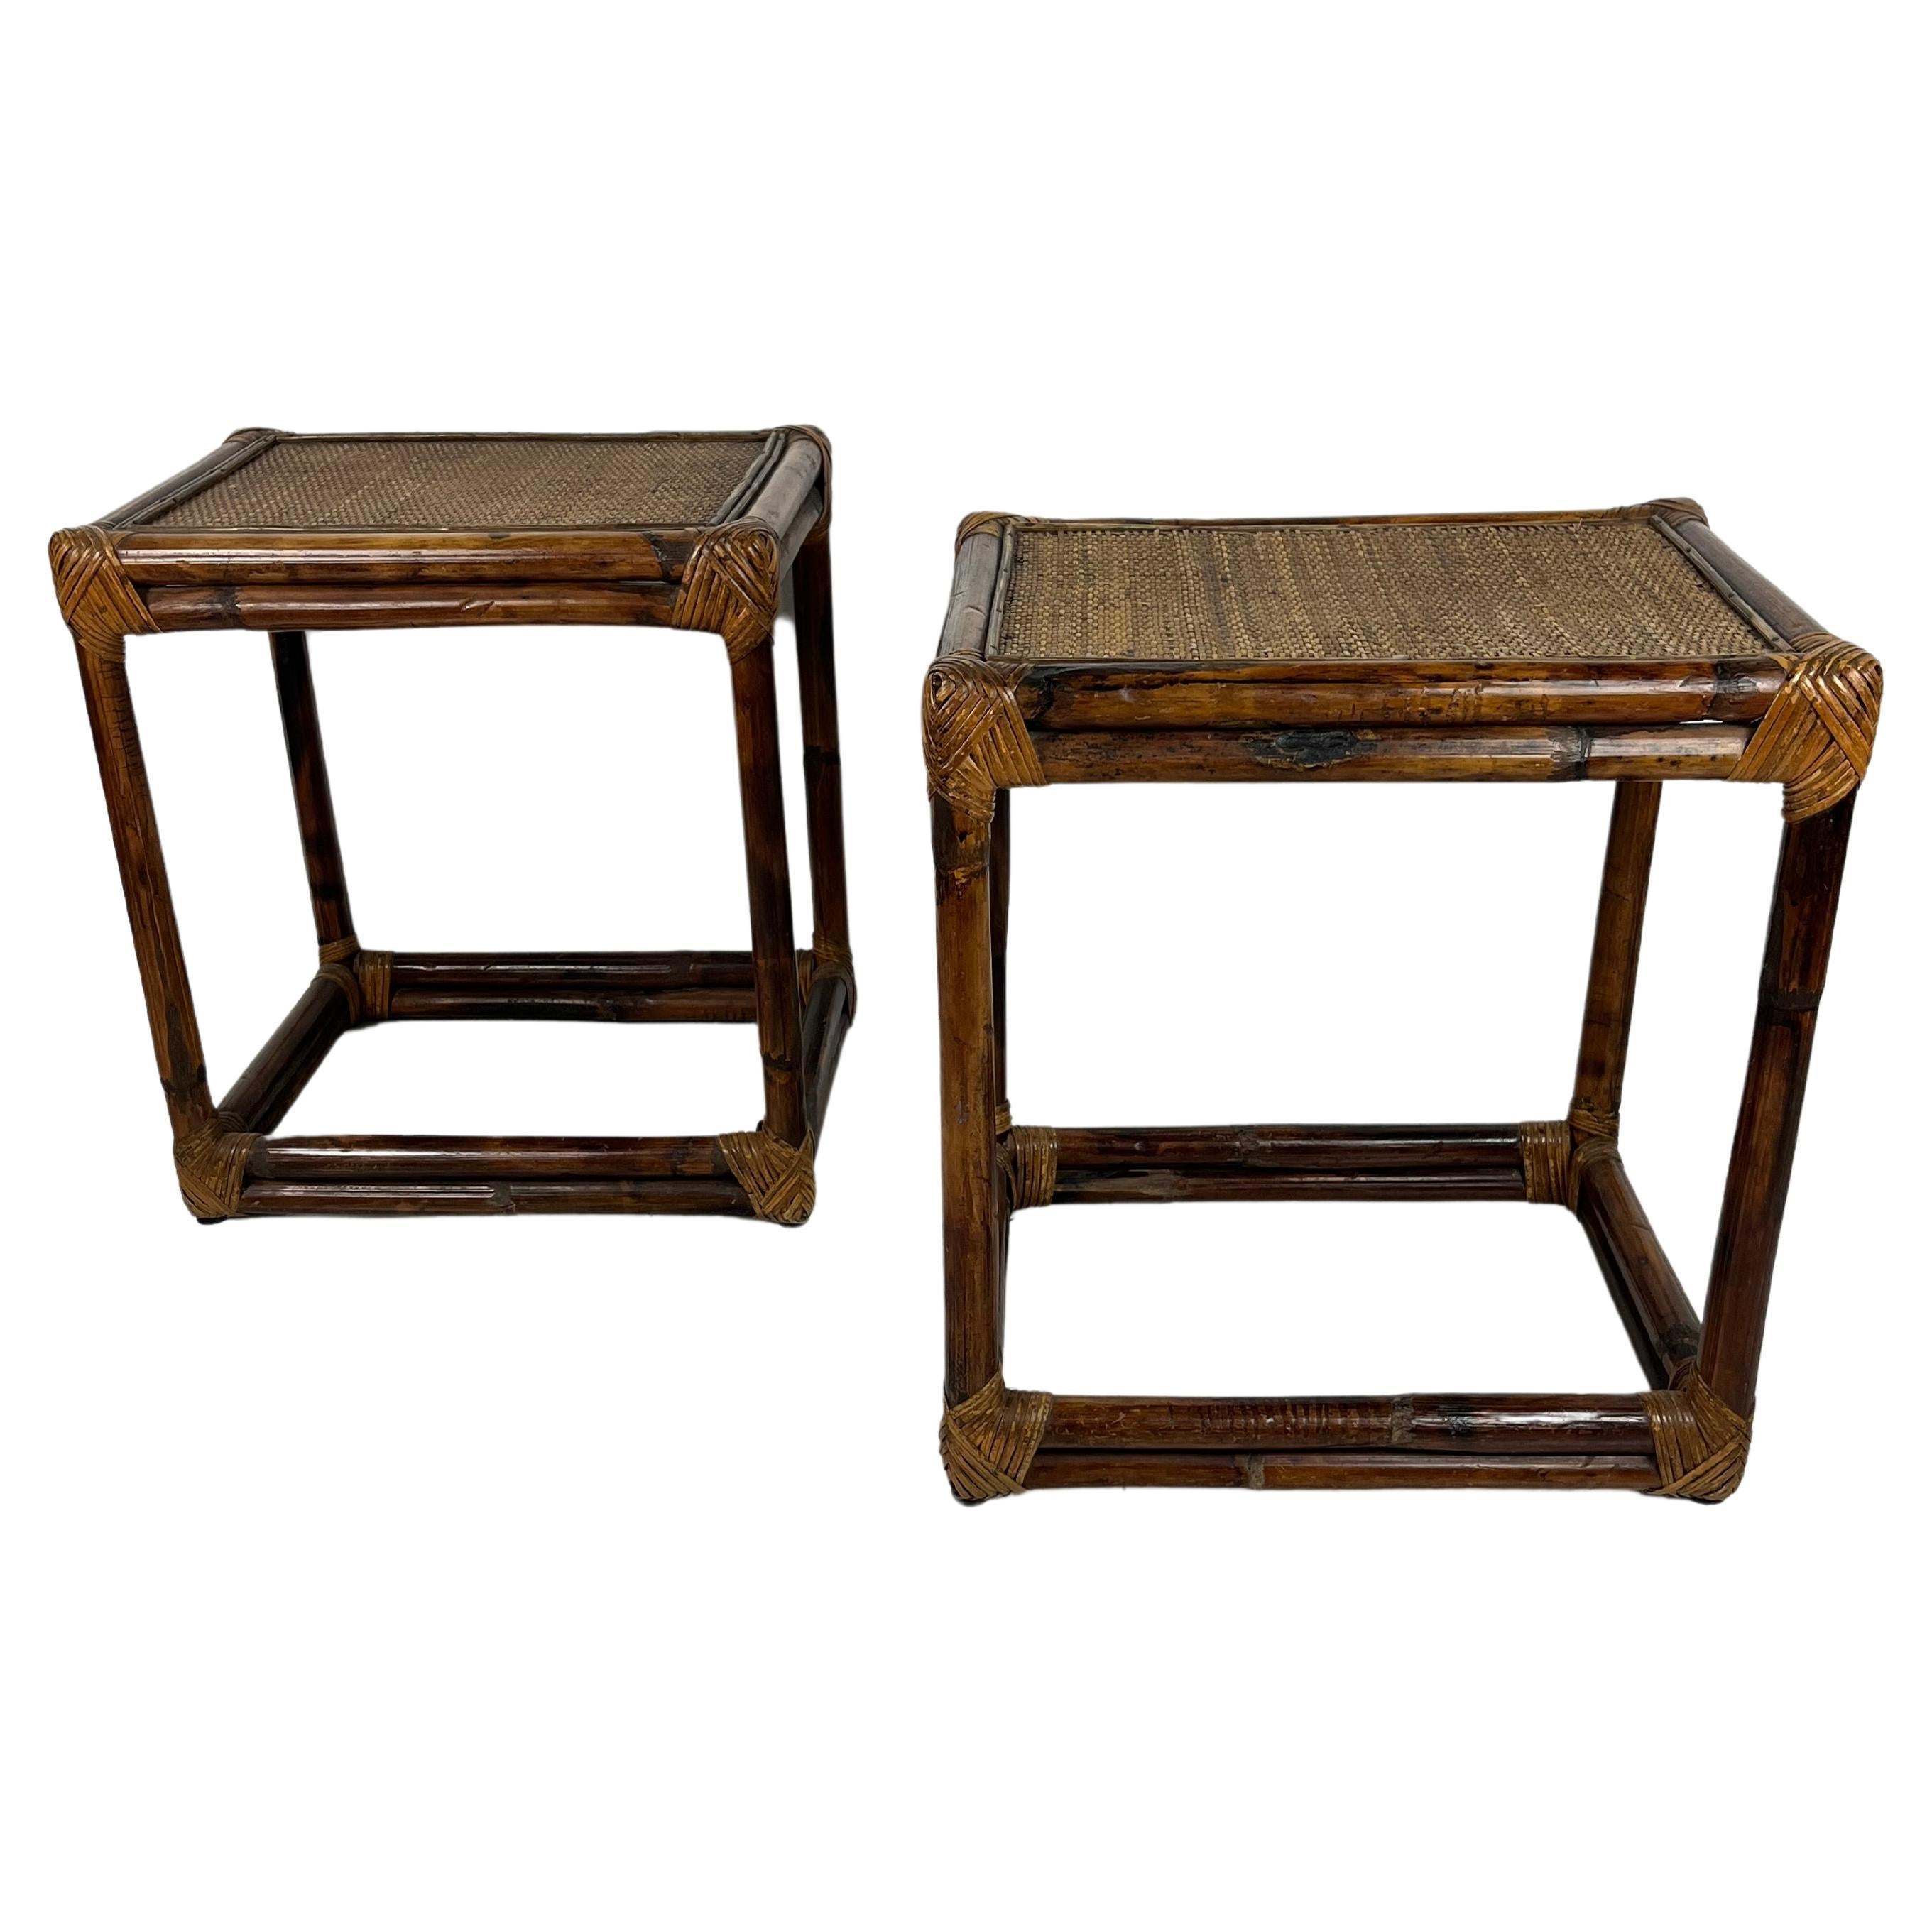 Pair of Bamboo Bedside Tables, Italy, 1960s For Sale